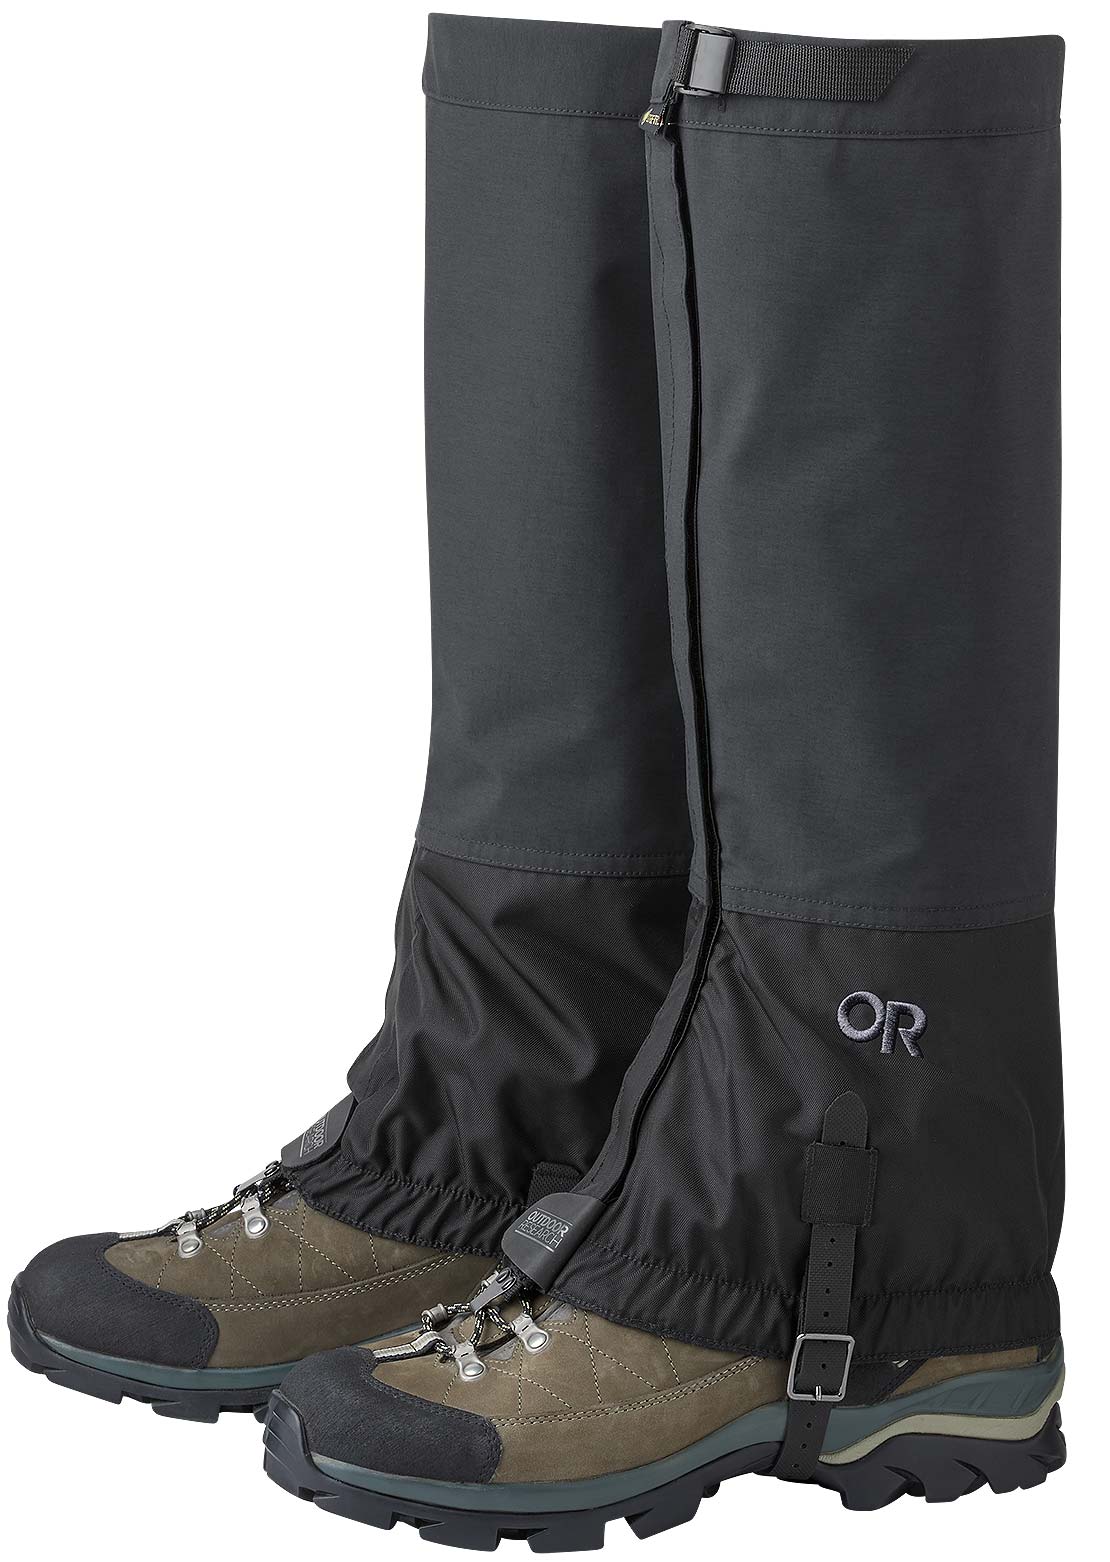 Outdoor Research Cascadia II Gaiters Black